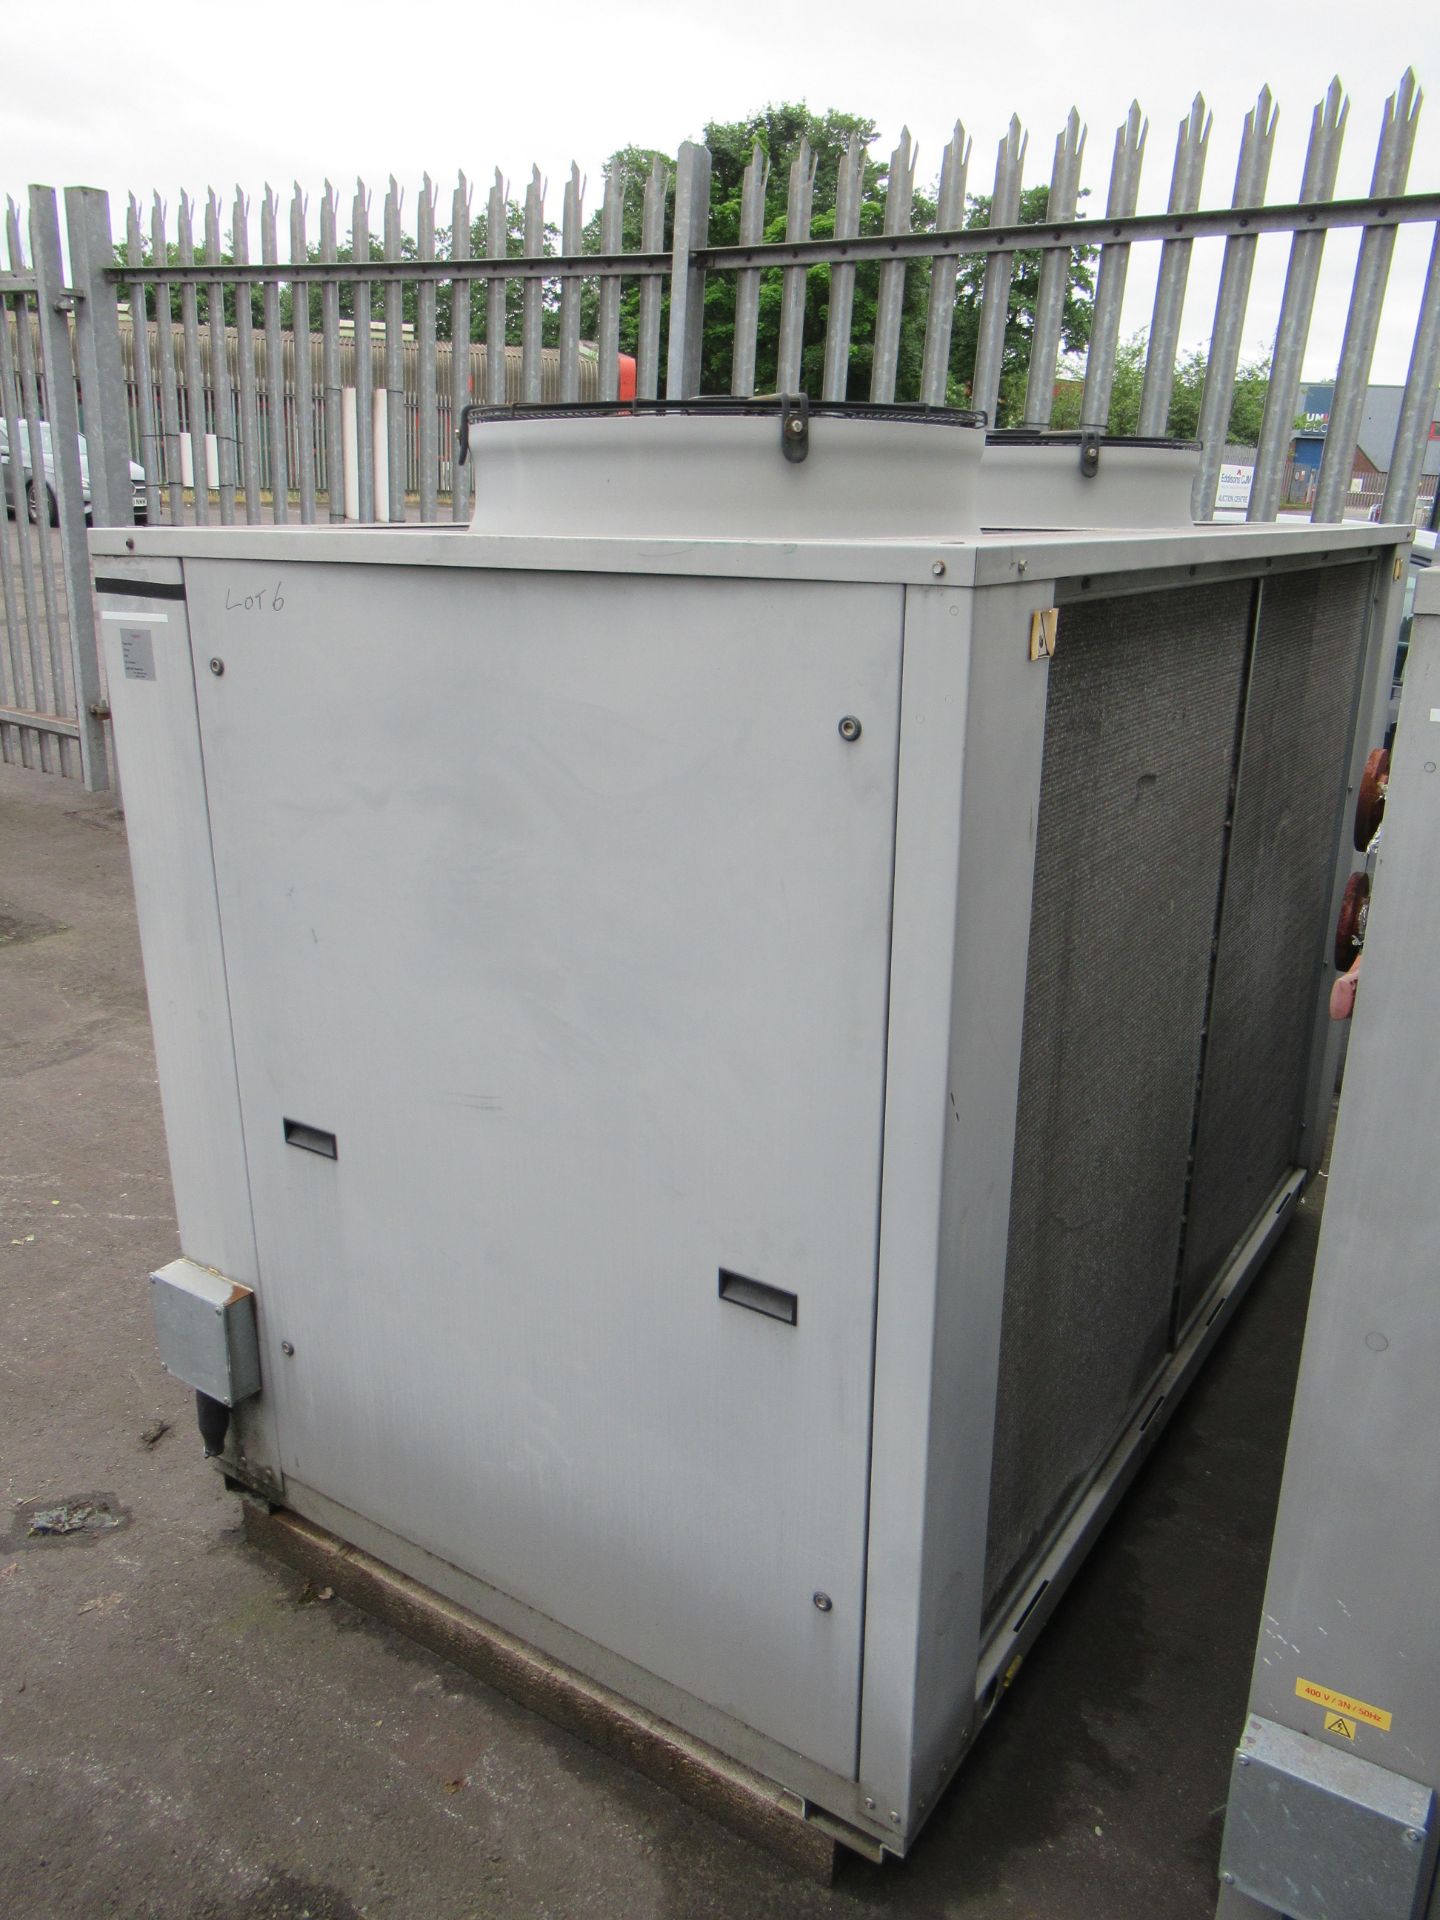 Schneider Uniflair Packaged Air Cooled Water Chiller. Model number ISAF0621A - Image 6 of 6